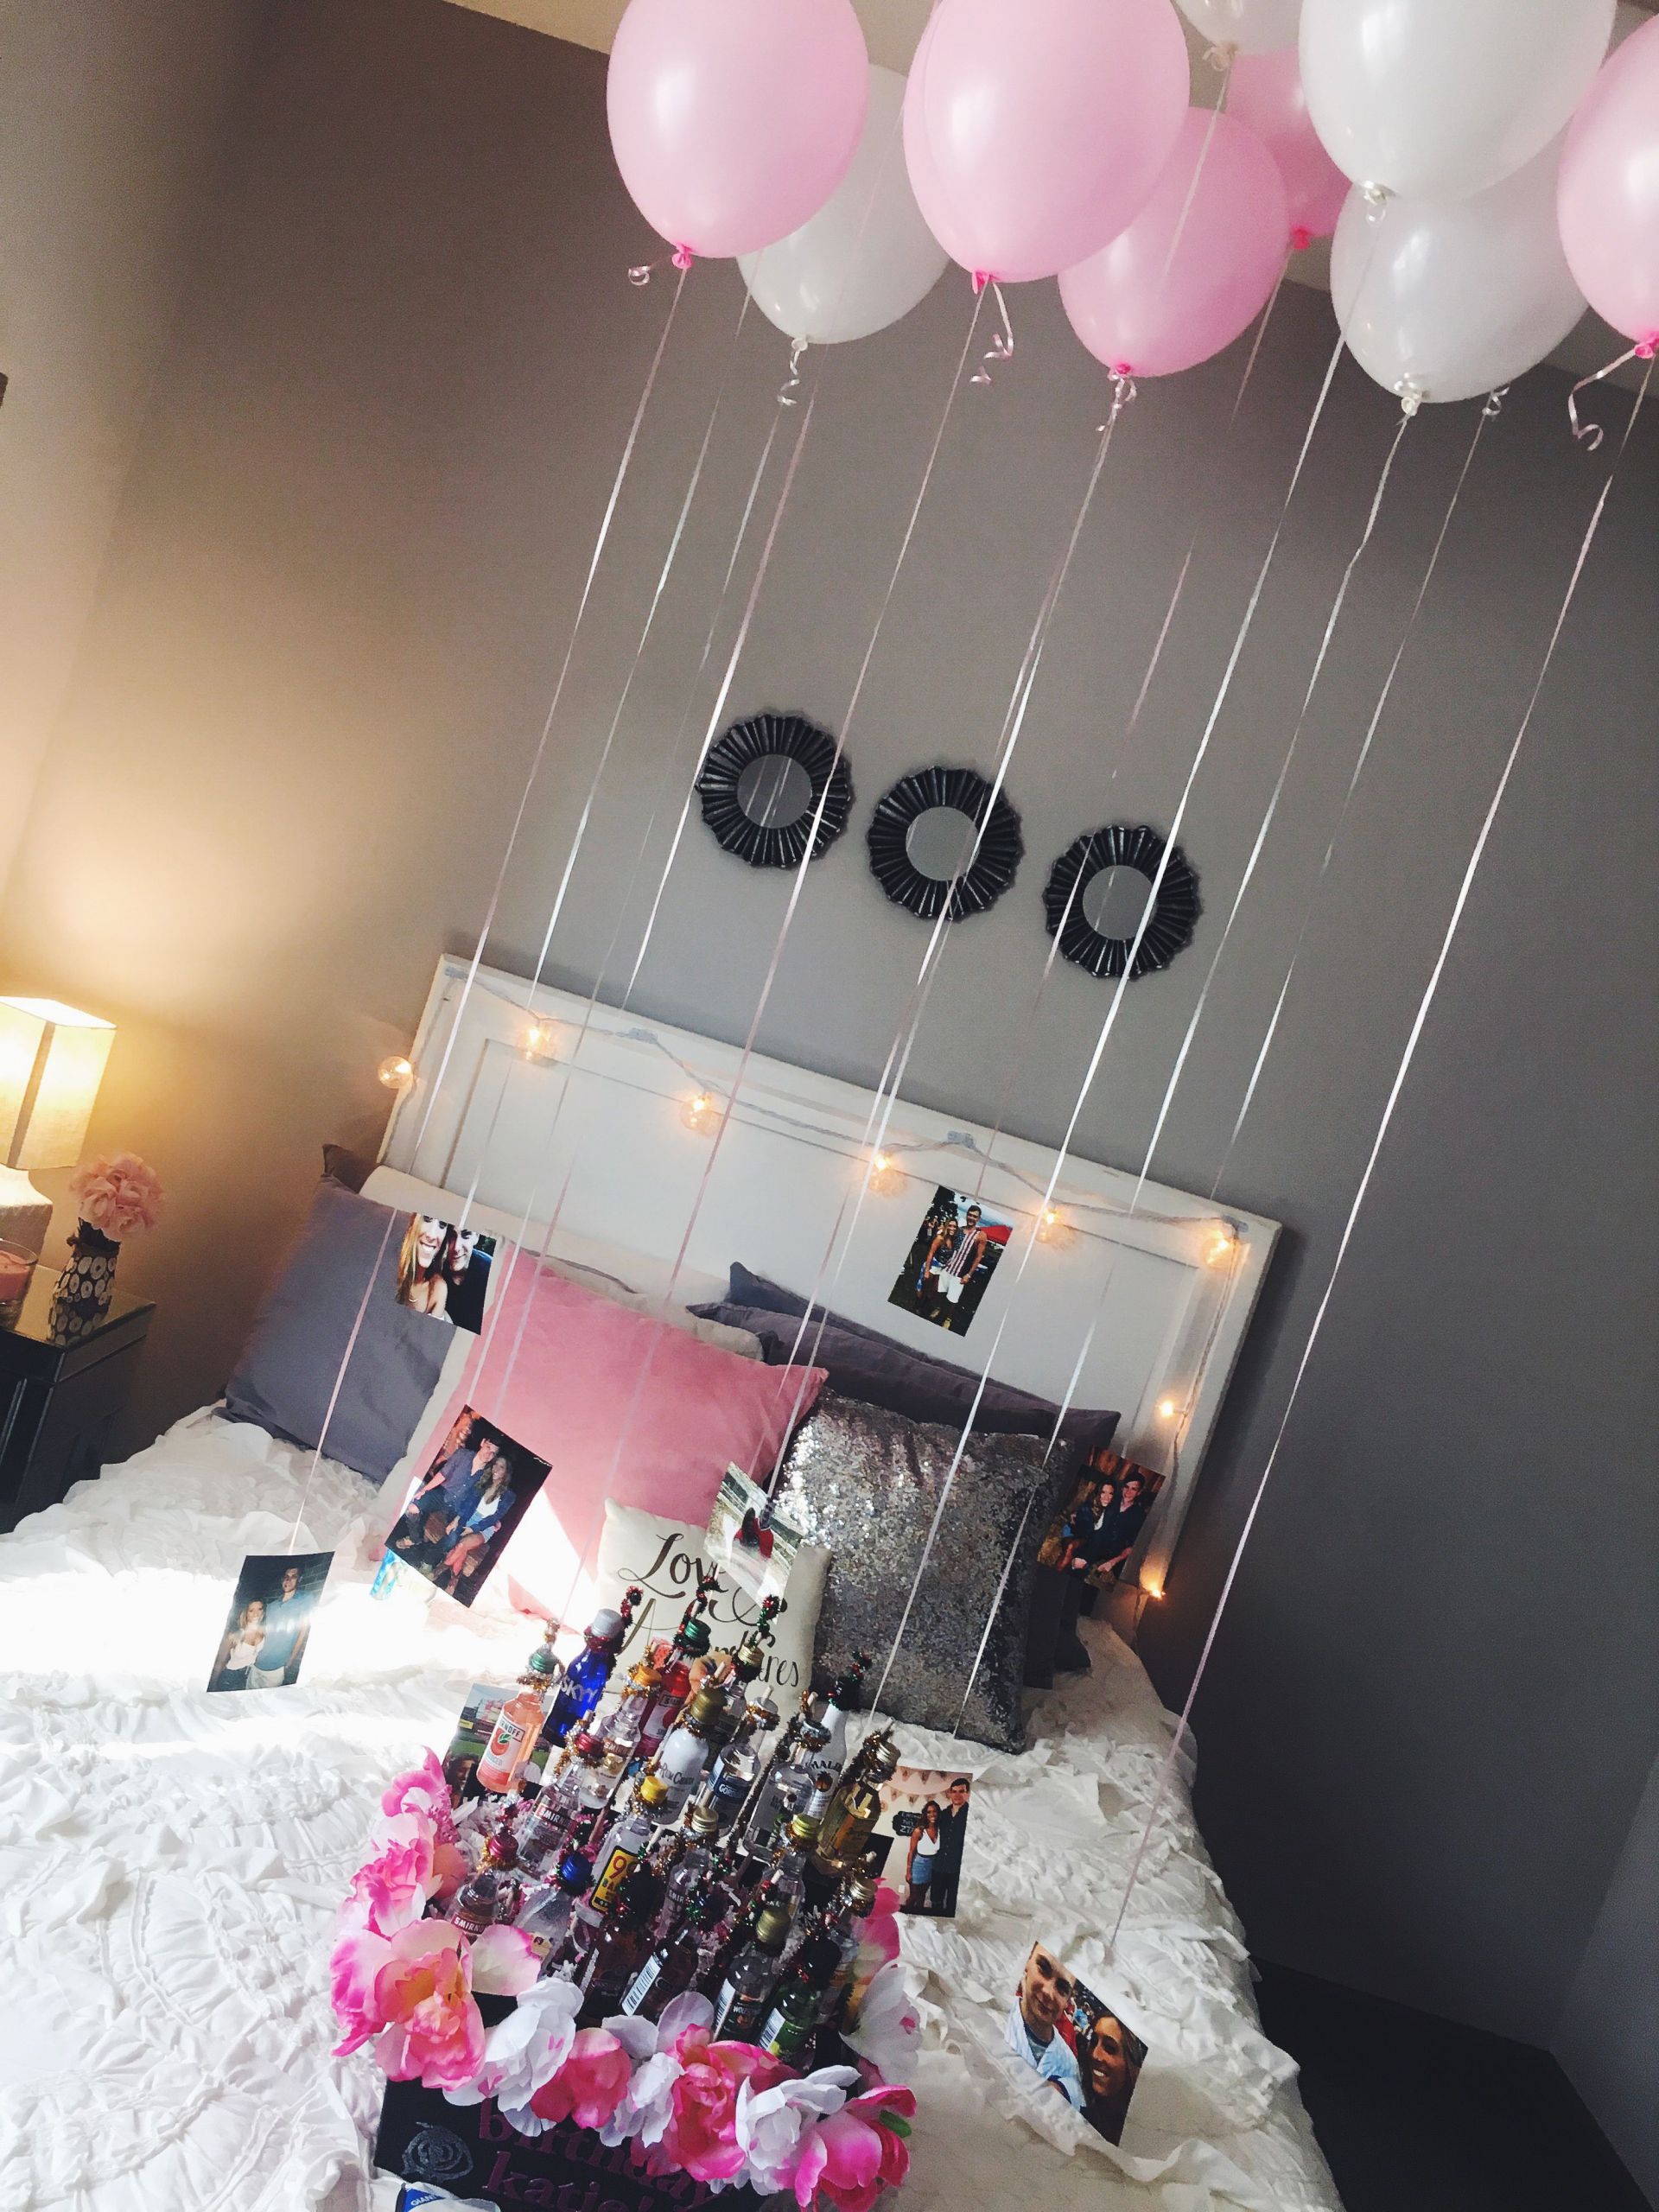 Good Gift Ideas For My Girlfriend
 easy and cute decorations for a friend or girlfriends 21st